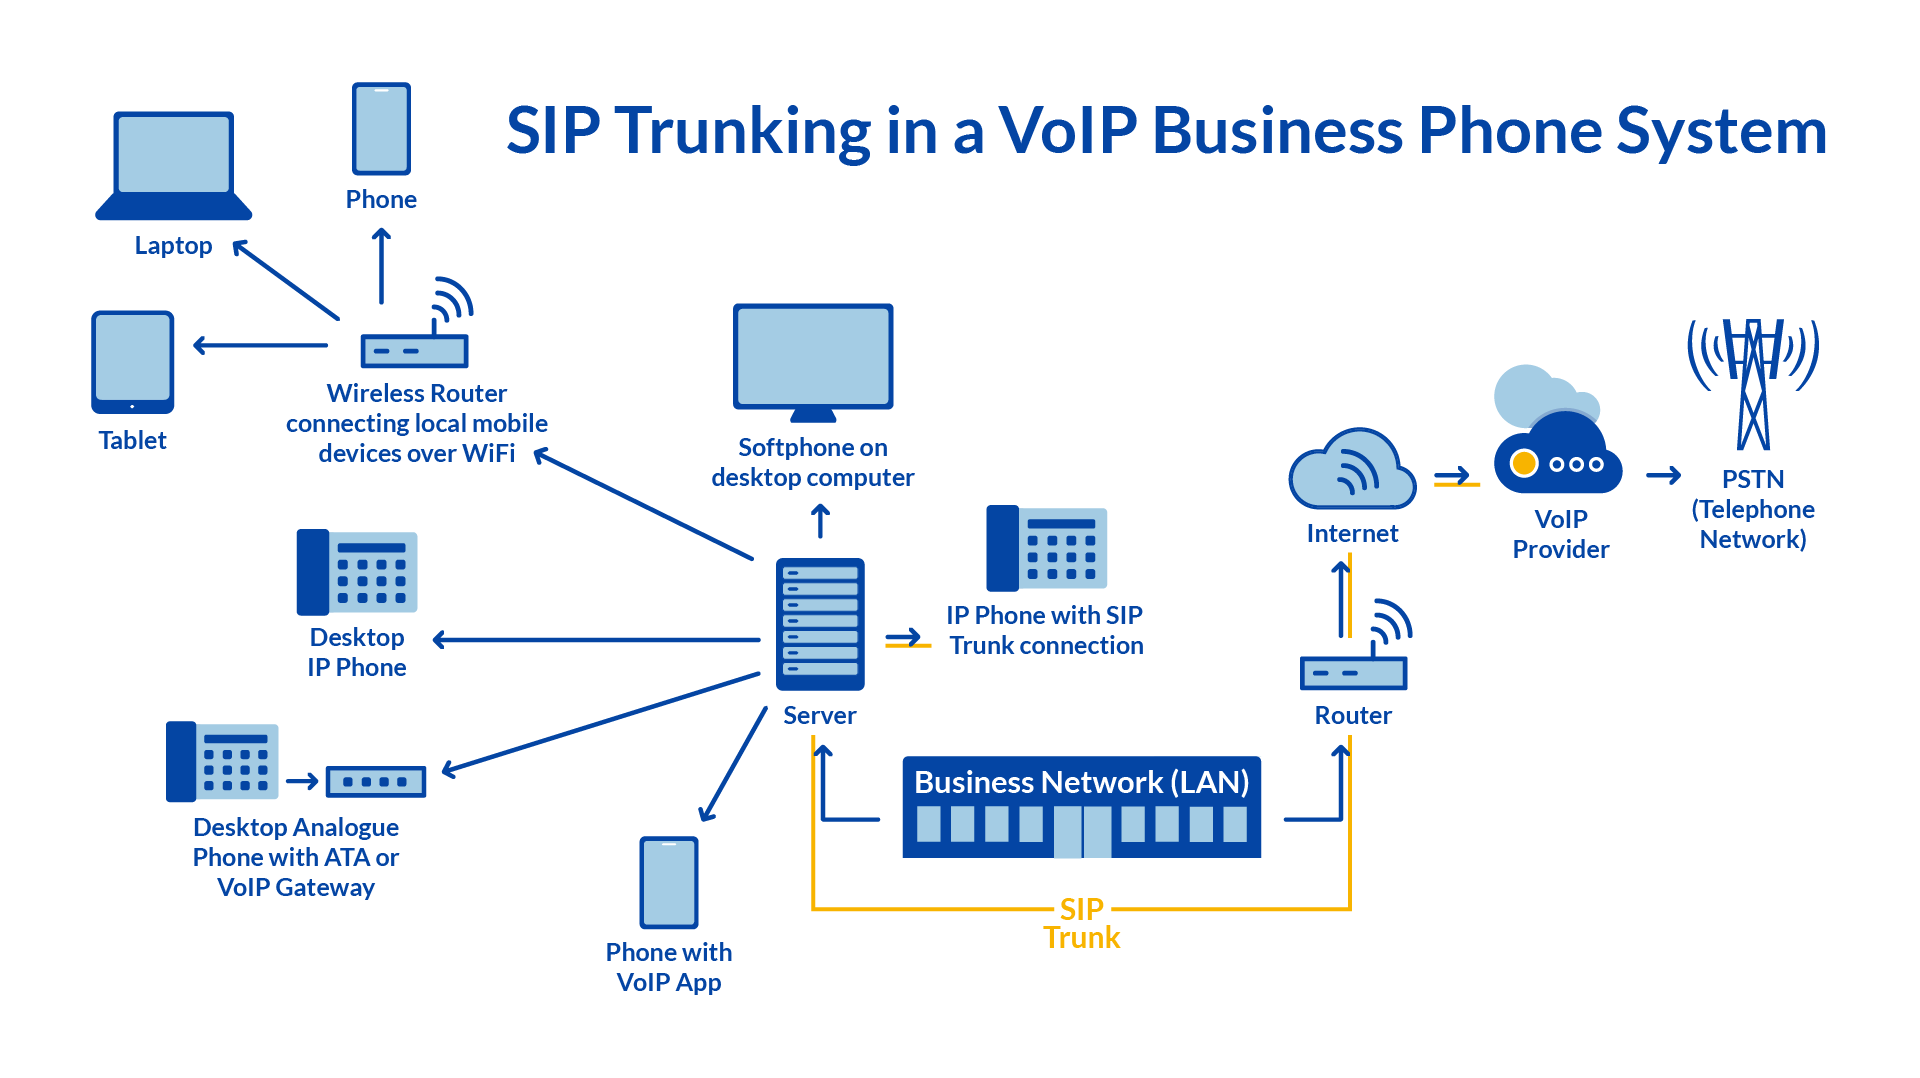 SIP Trunking Diagram on how SIP trunking works in a VoIP Business Phone System